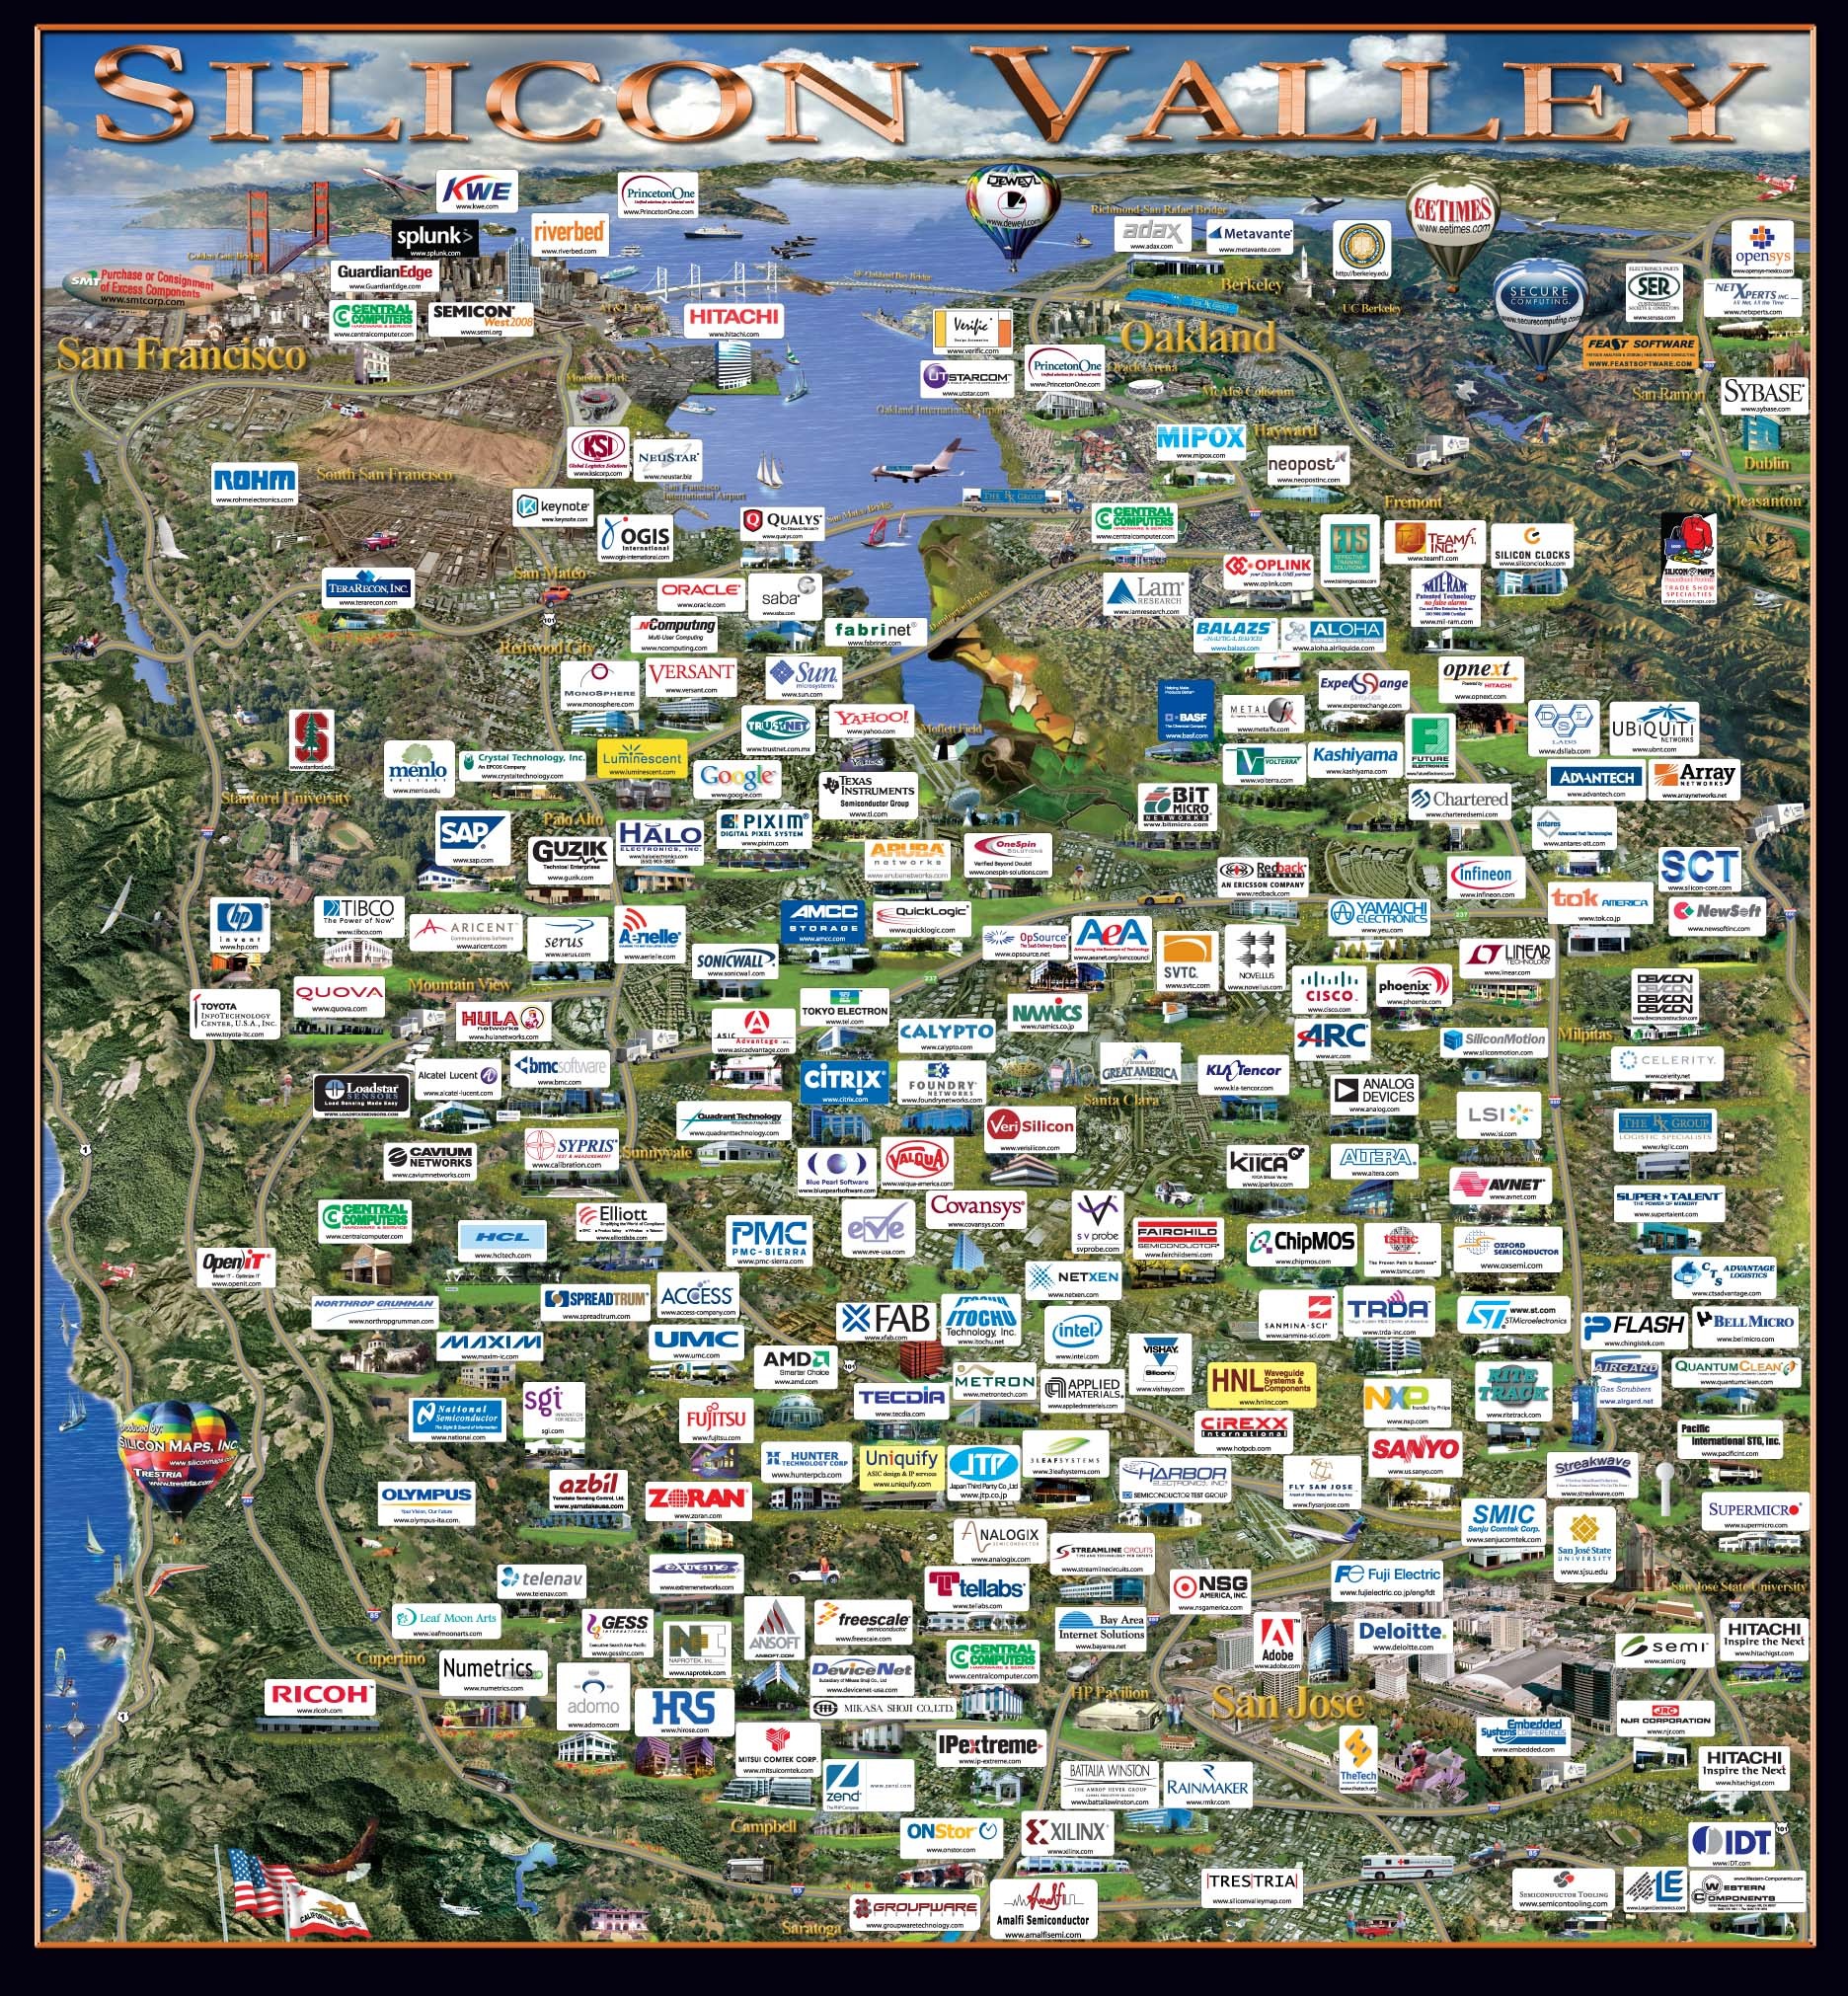 Coolest Bay Area Companies of 2009